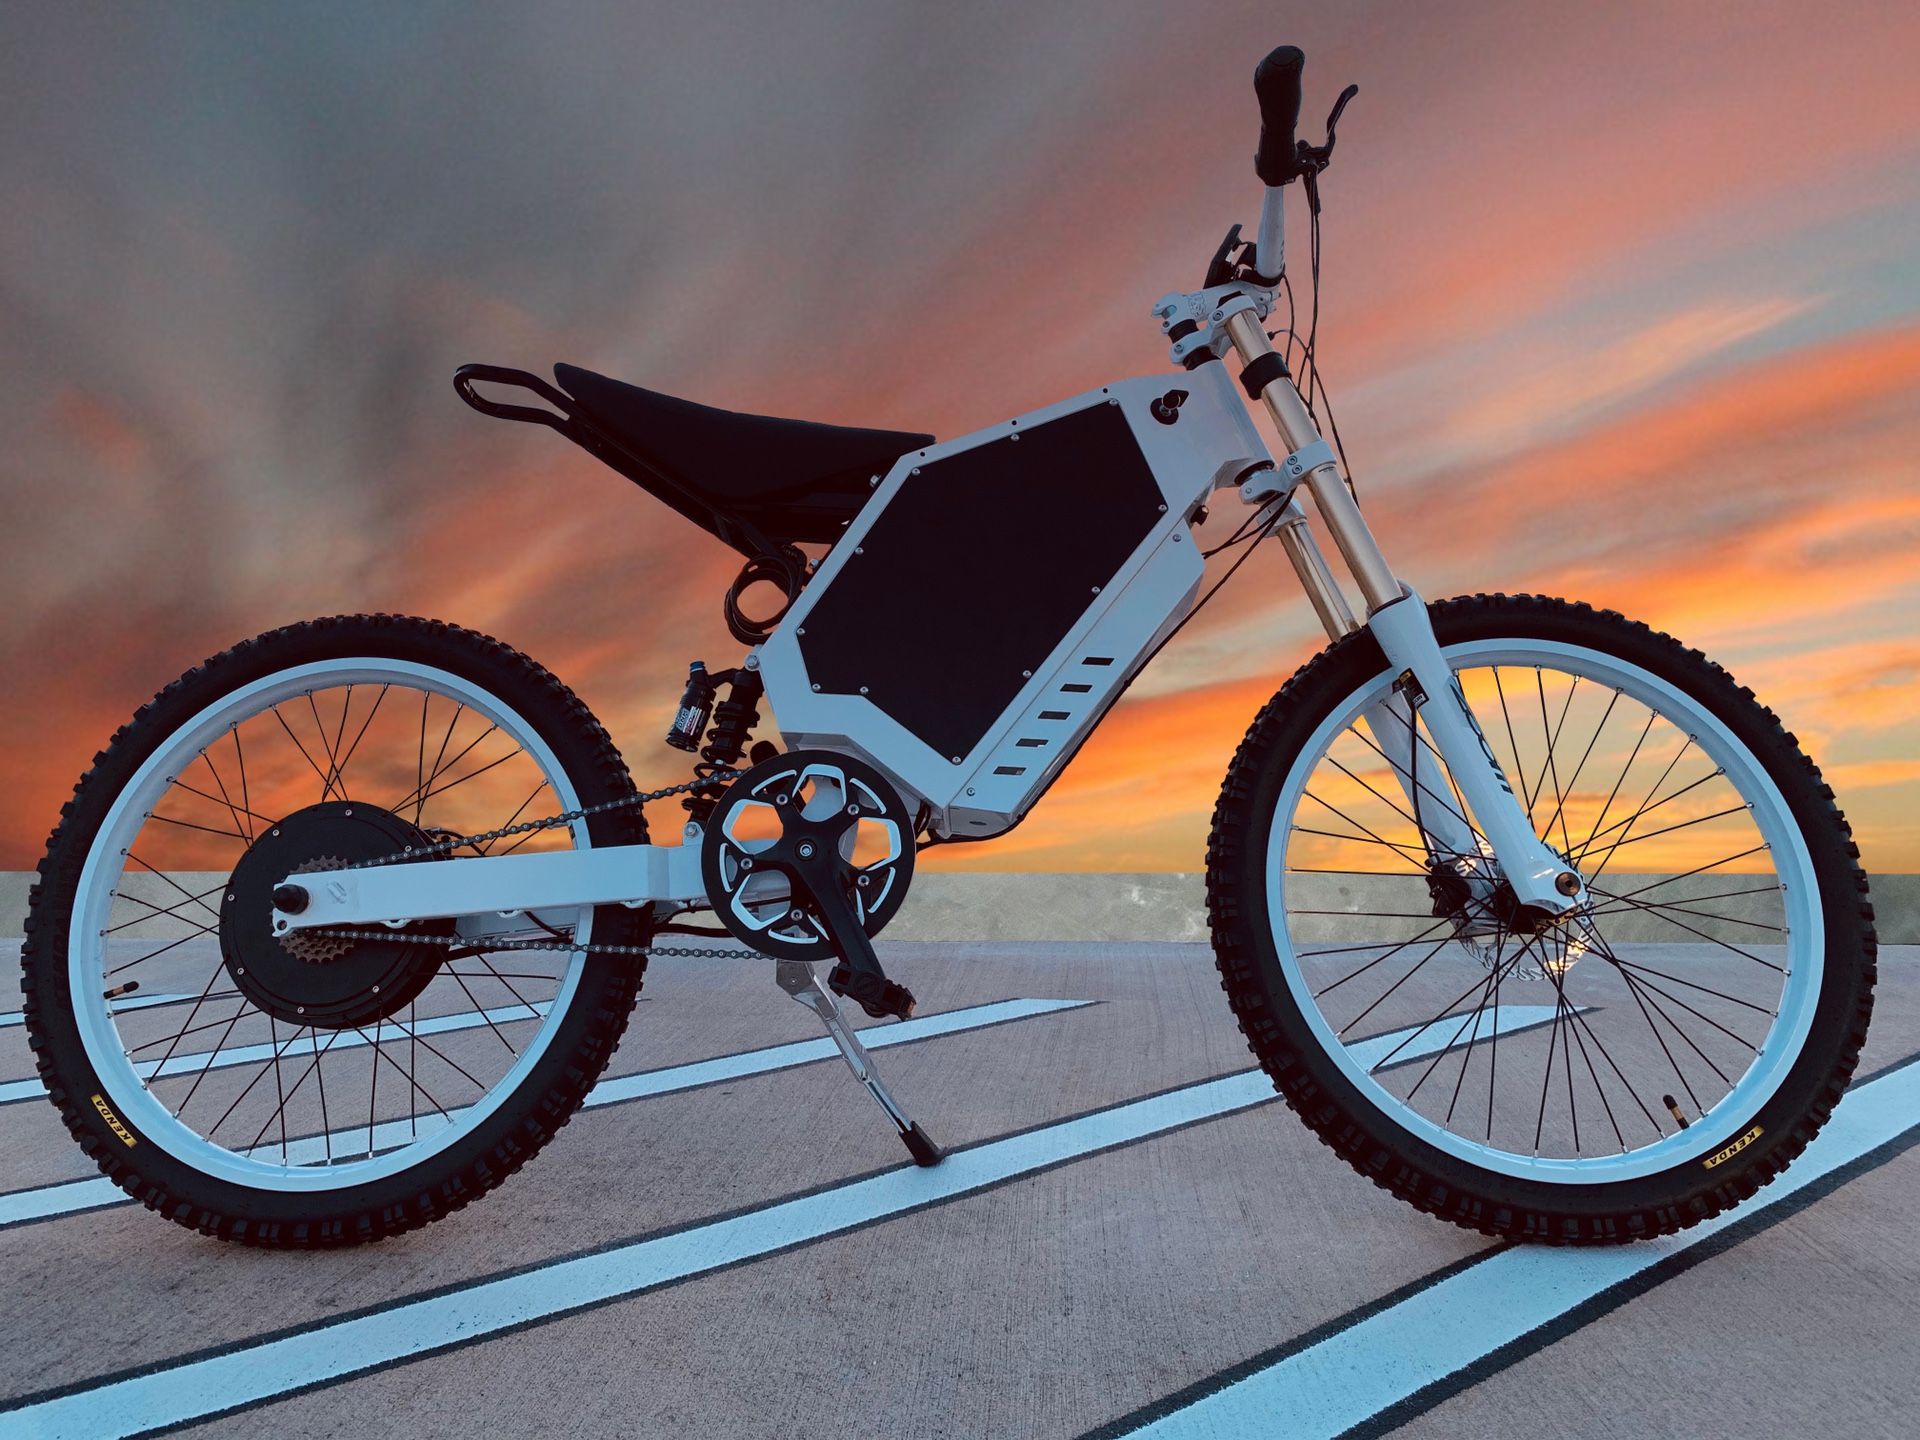 2020 5000w 72v Electric Dirtbike Motorcycle Scooter Bike - 50mph